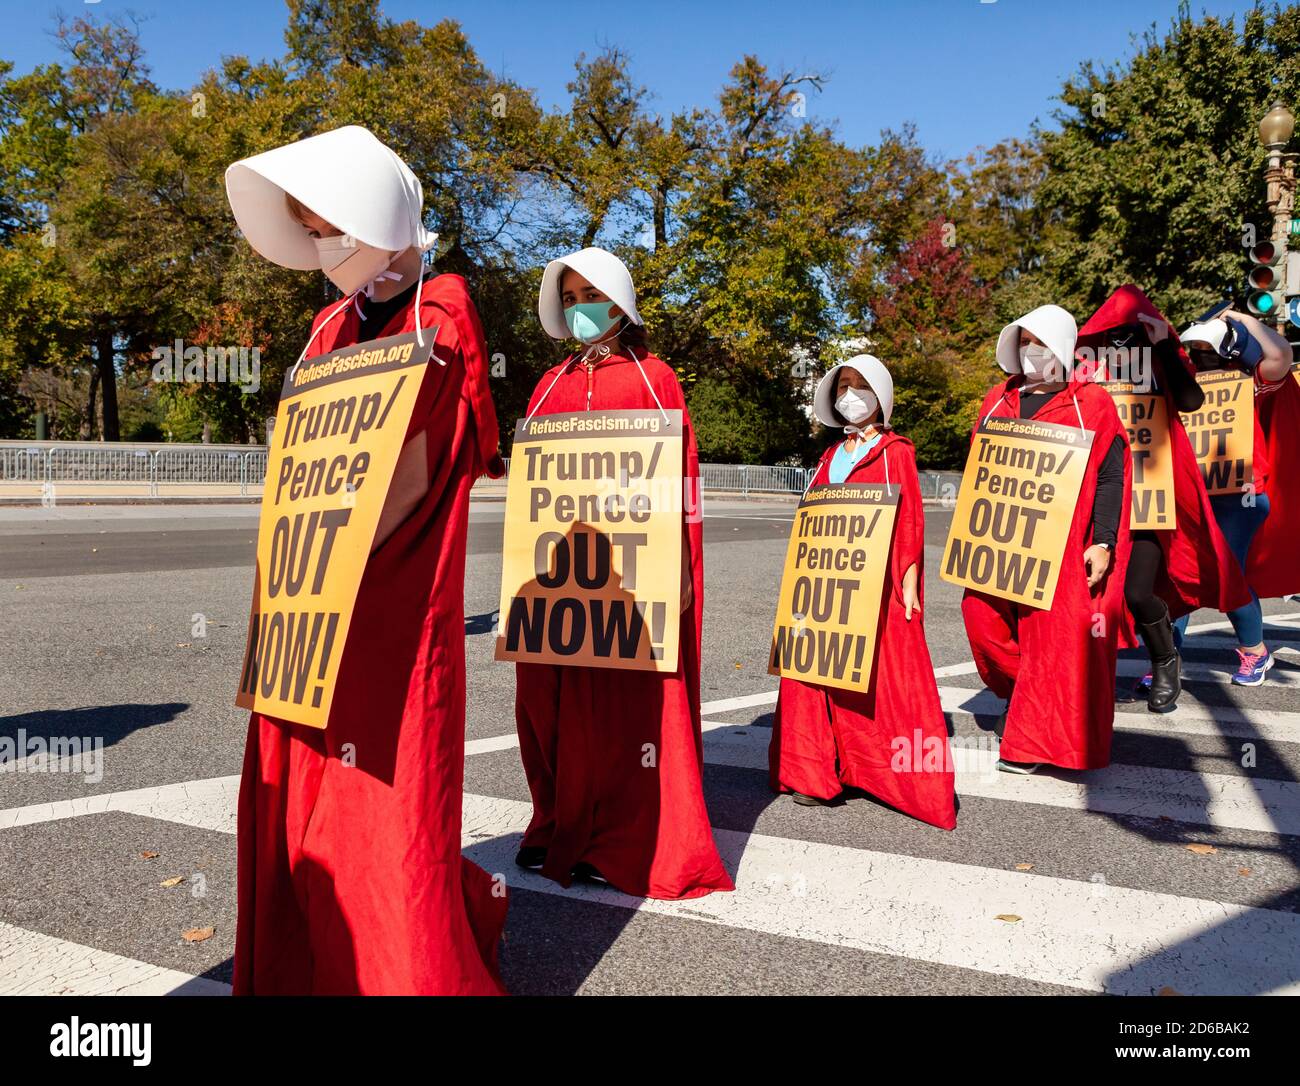 Washington, DC, USA, 15 October, 2020.  Pictured: Women and girls dressed as handmaids walk silently from their gathering point during the Descend on the Supreme Court protest held by Refuse Fascism DC.  For the event, women dressed as handmaids in red capes from The Handmaid's Tale and stood in front of the Supreme Court building to protest the nomination of Amy Coney Barrett and fascist policies of the Trump Administration.  The protest continued Refuse Fascism's demand for immediate removal of Donald Trump and Mike Pence from office.  Credit: Allison C Bailey/Alamy Live News Stock Photo